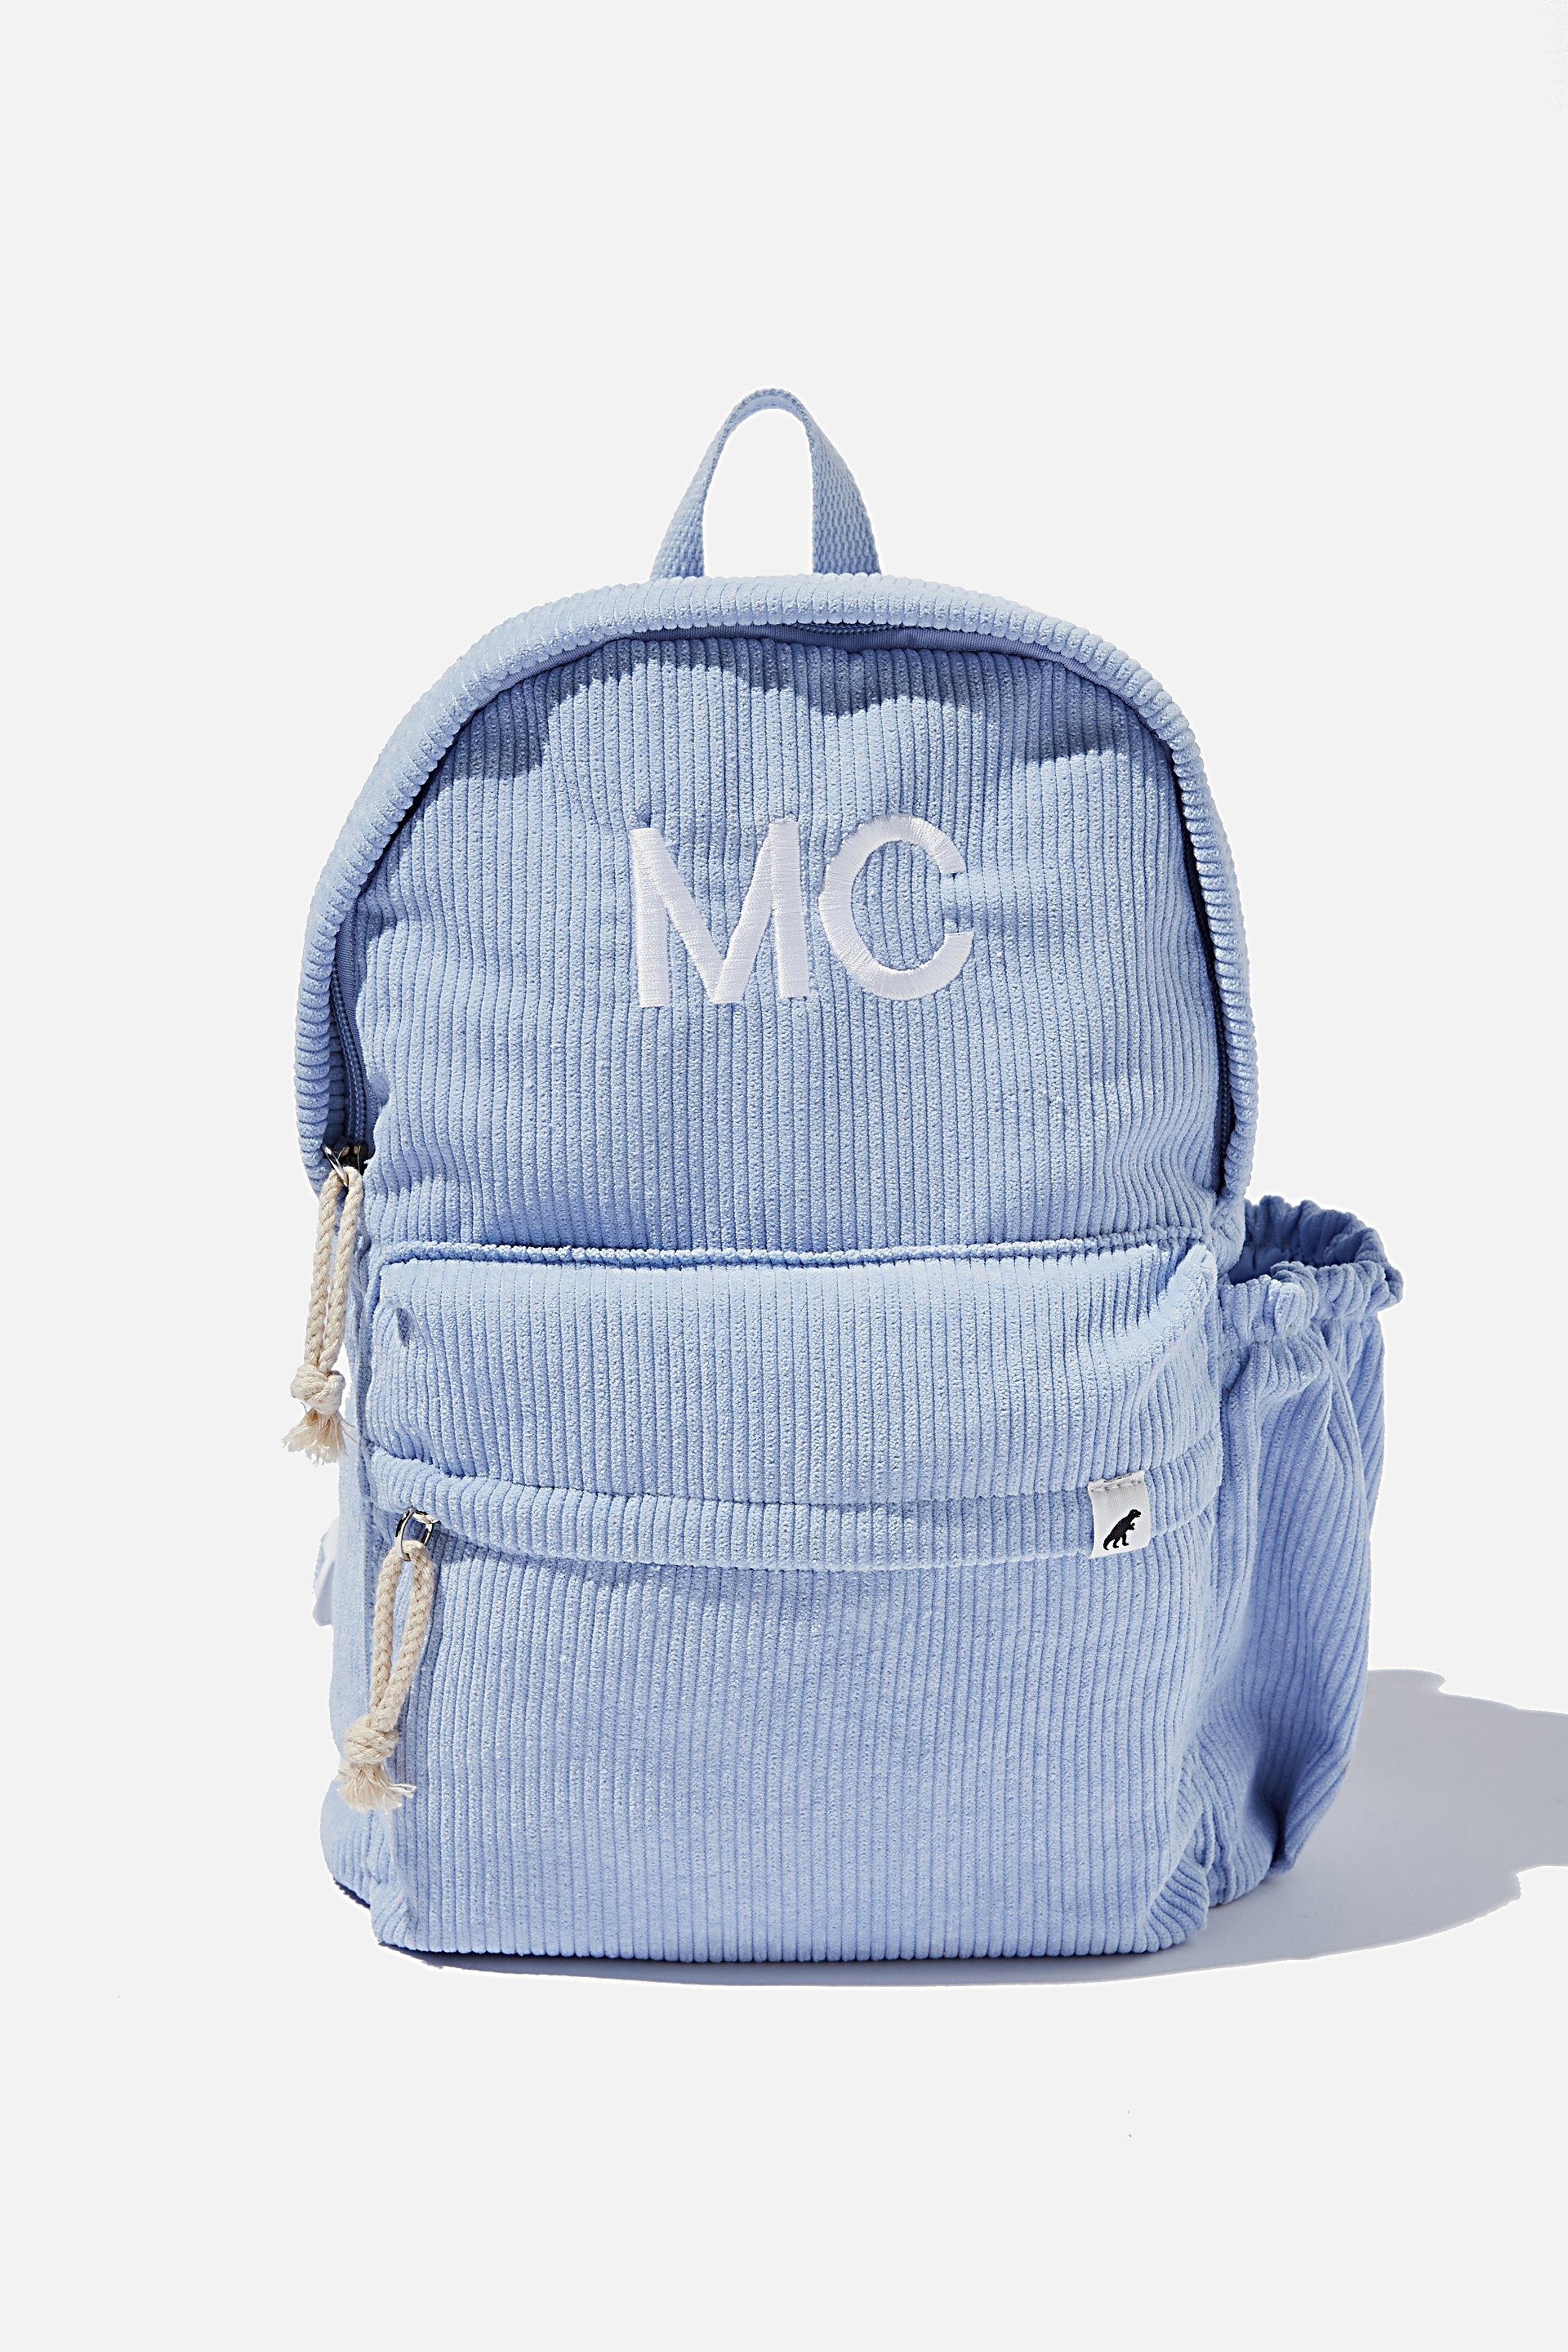 Cotton On Kids - Personalised Back To School Cord Backpack - Sky haze